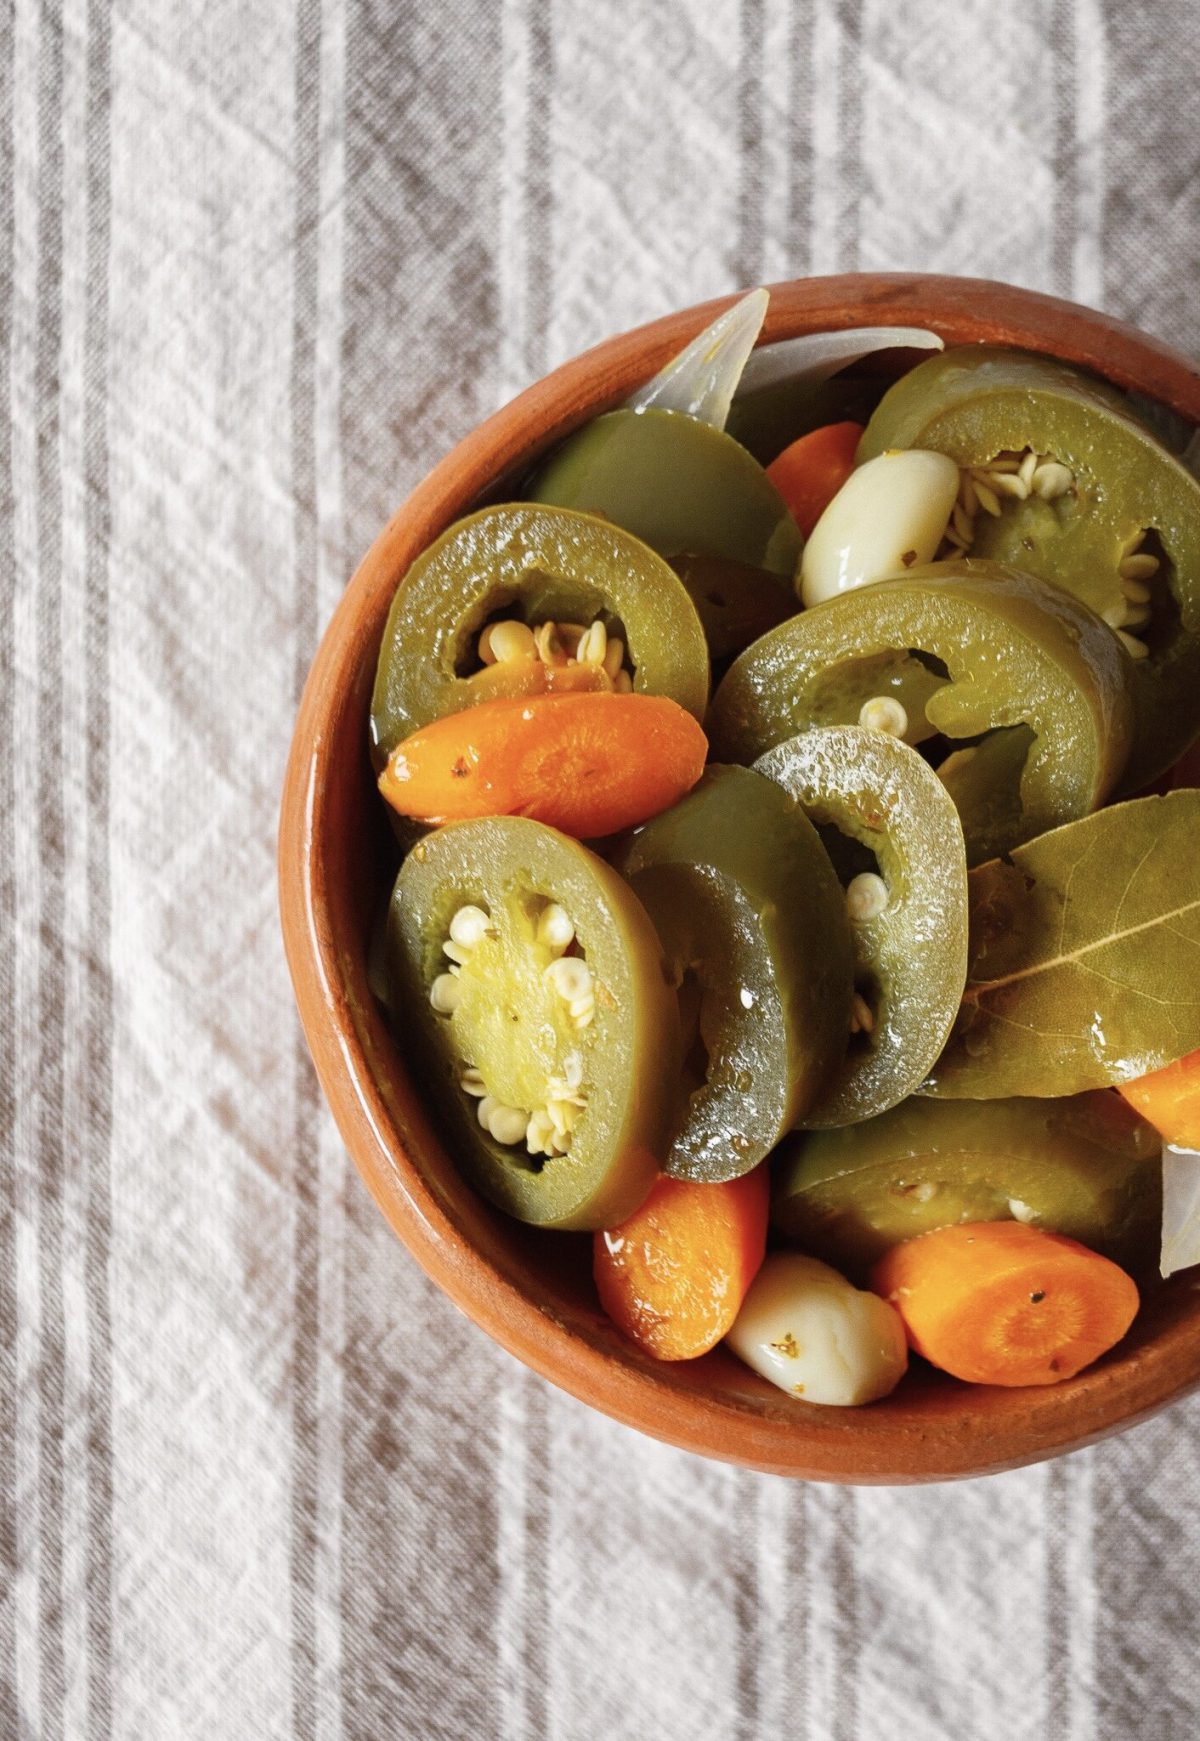 Easy Pickled Jalapeños Recipe - How to Make Jalapeños en Escabeche